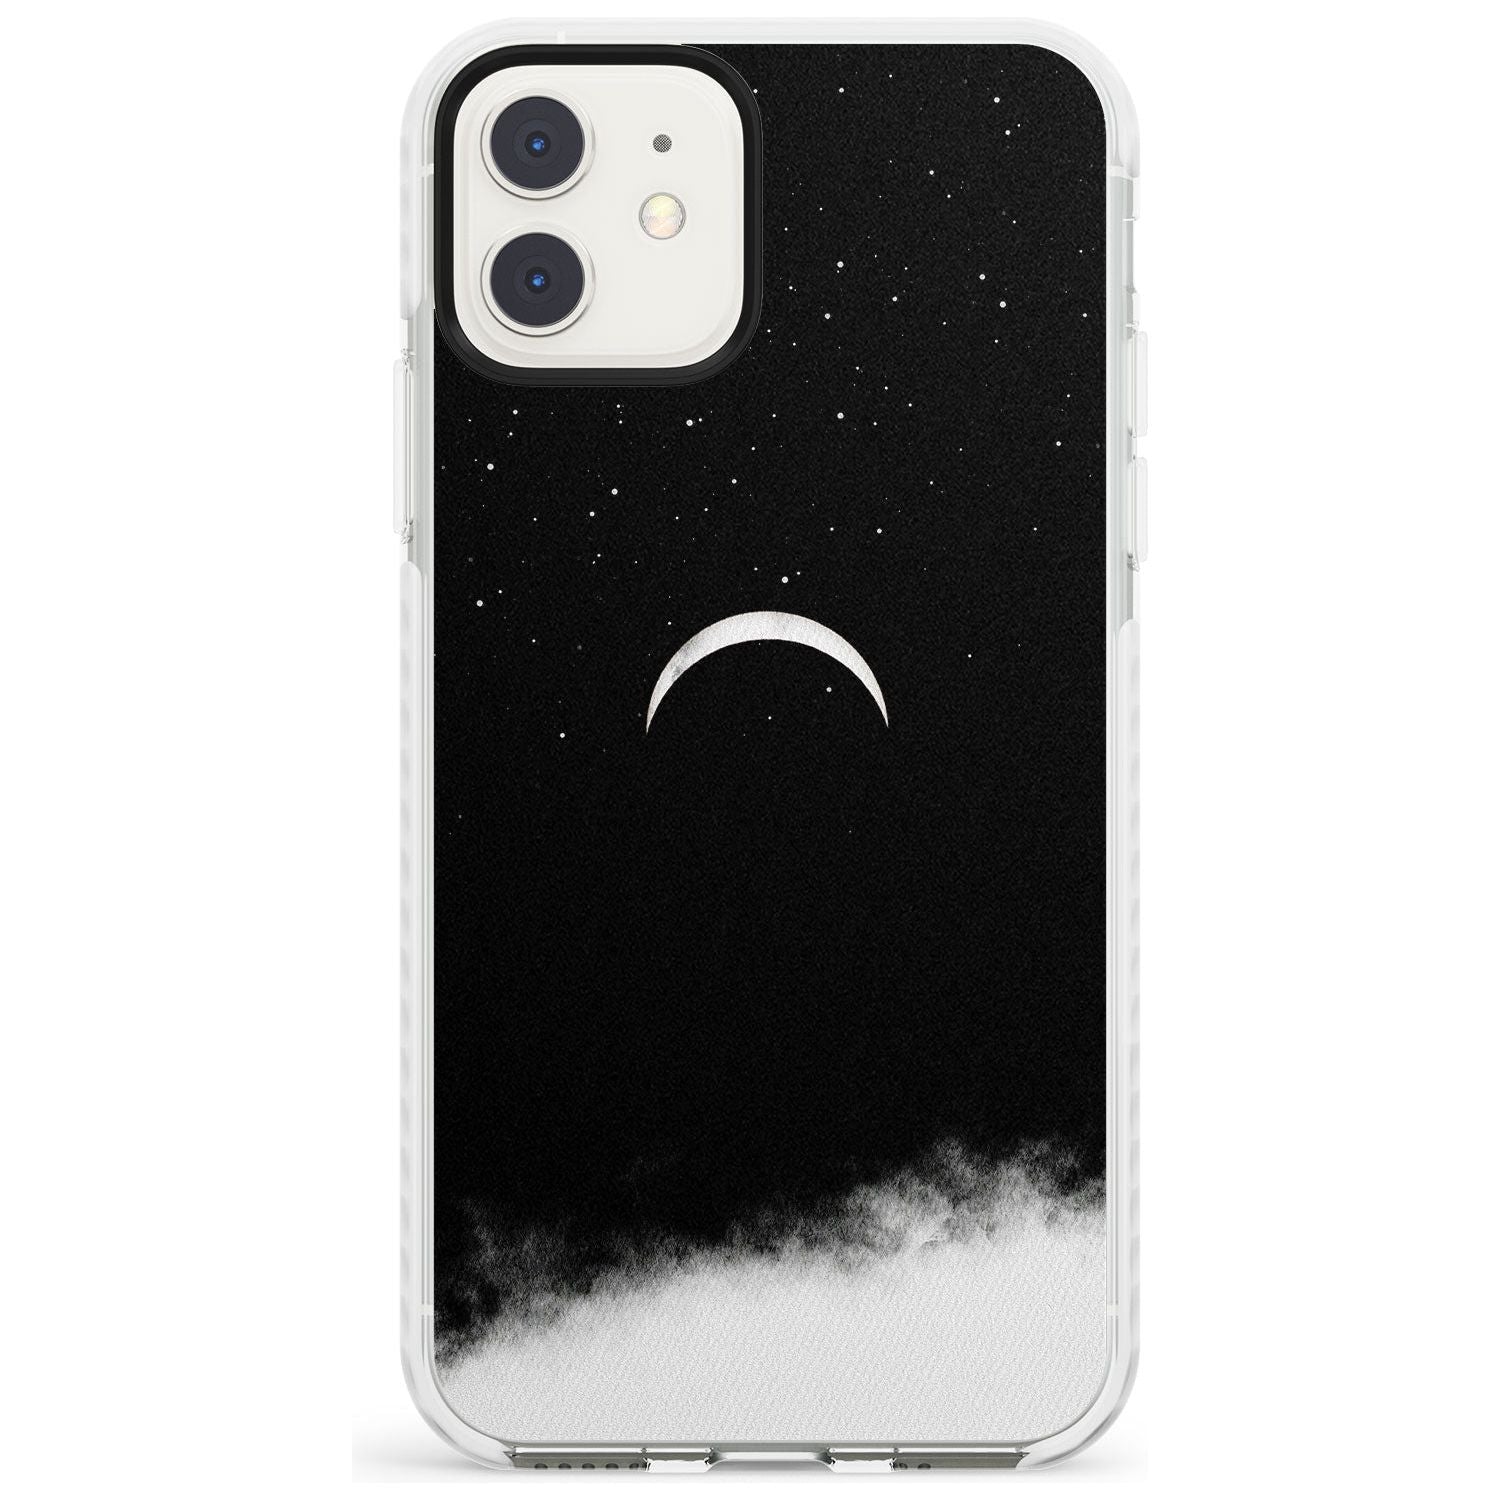 Upside Down Crescent Moon Impact Phone Case for iPhone 11